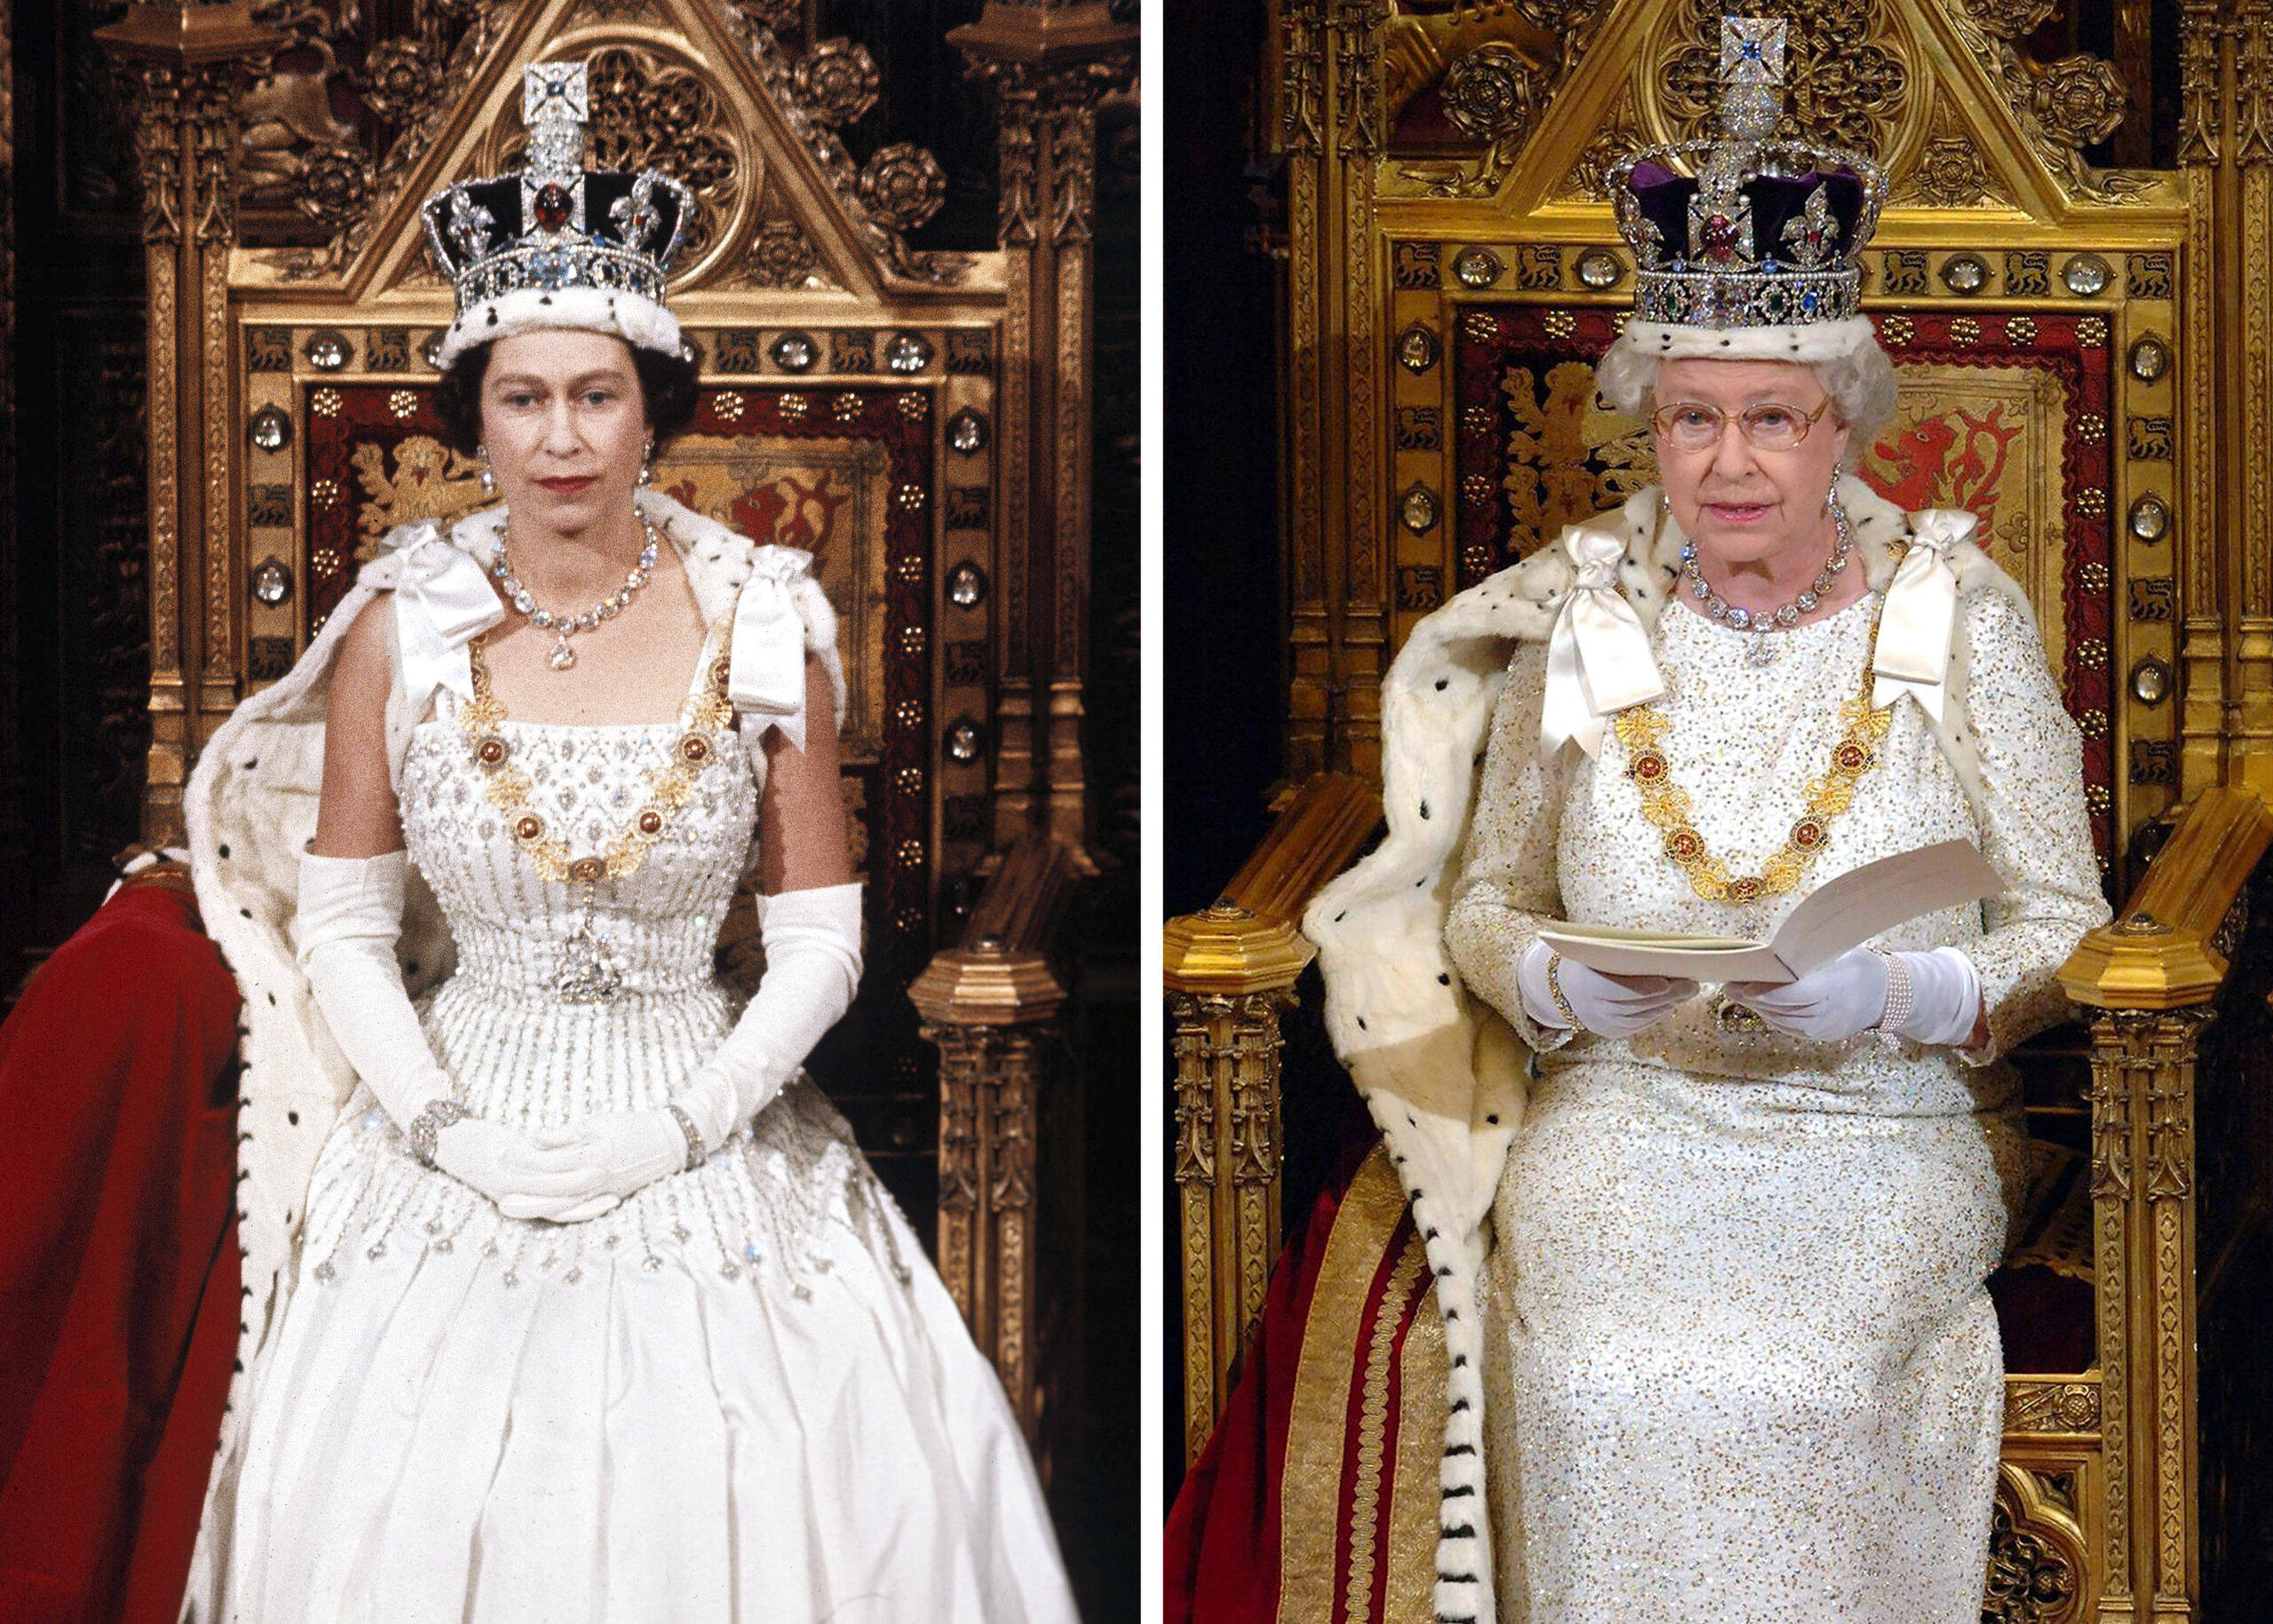 FILE - This photo combo shows Britain's Queen Elizabeth II during the State Opening of Parliament, London, in April, 1966 on the left and Nov. 15, 2006, on the right. Queen Elizabeth II will mark 70 years on the throne Sunday, Feb. 6, 2022 an unprecedented reign that has made her a symbol of stability as the United Kingdom navigated an age of uncertainty. (AP Photo, Arthur Edwards, Pool, File)